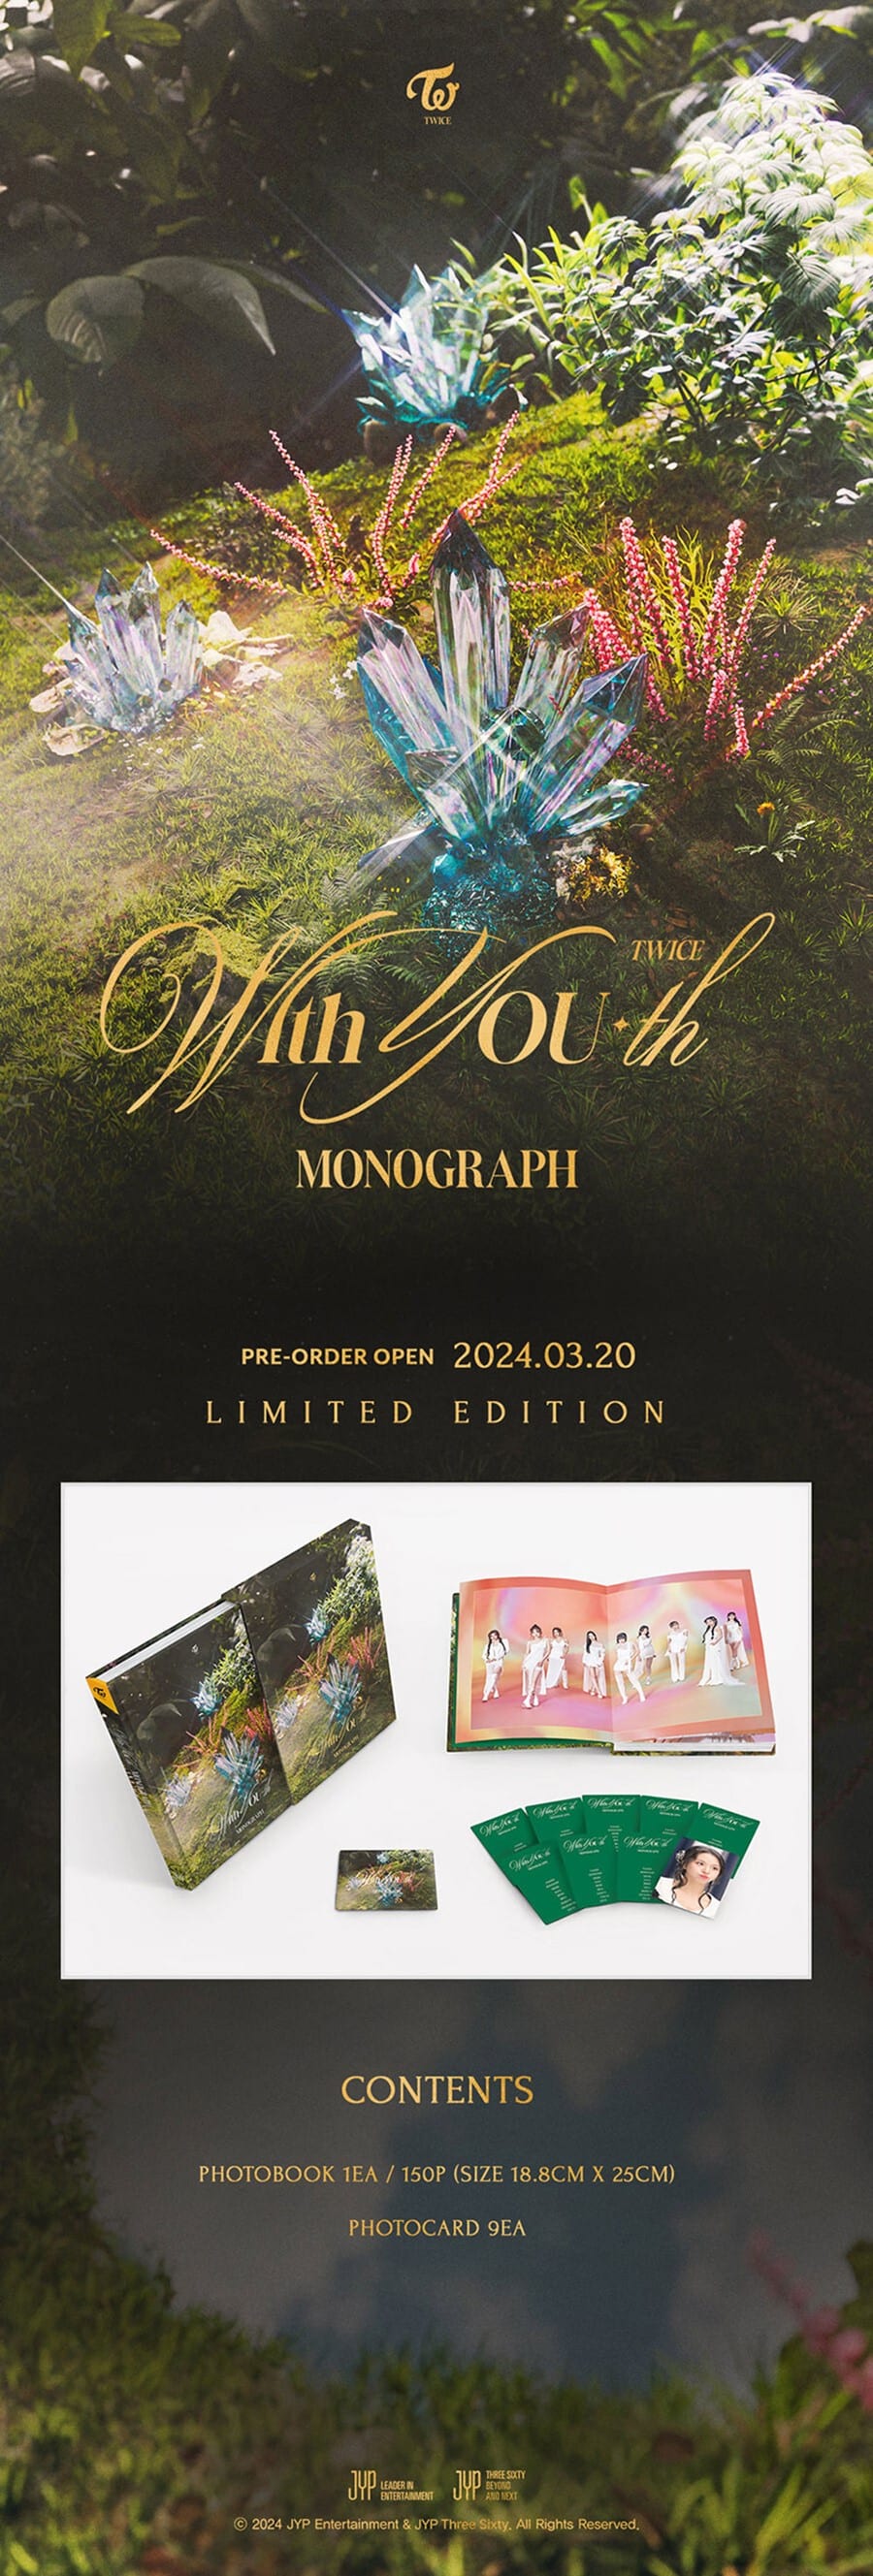 twice-monograph-with-you-th-wholesales